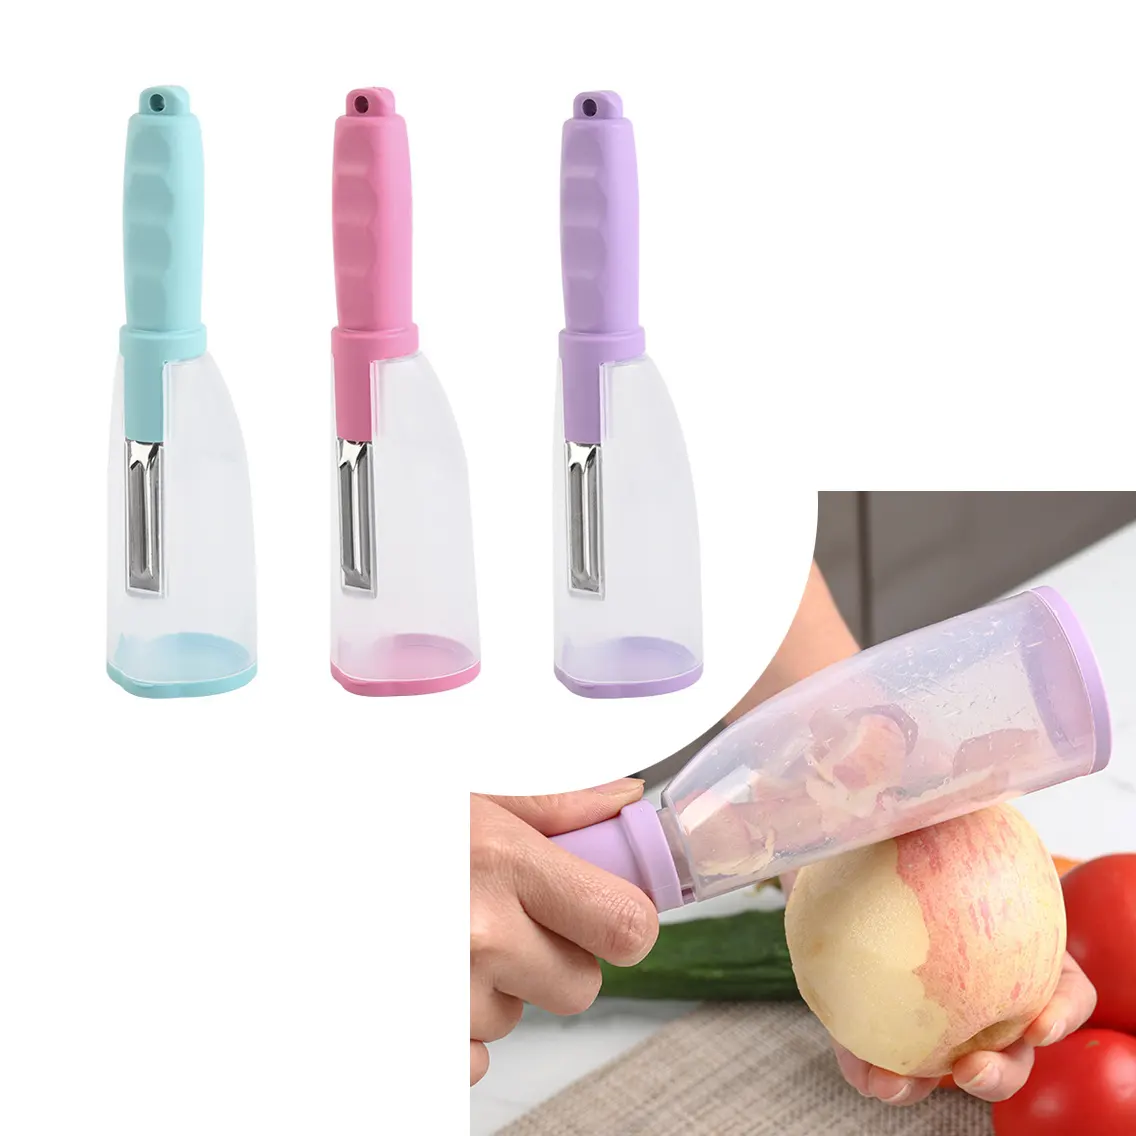 Multi-function Smart Gadget Kitchen Tools Stainless Steel Manual Vegetable Fruit Peeler With Skin Storage Container